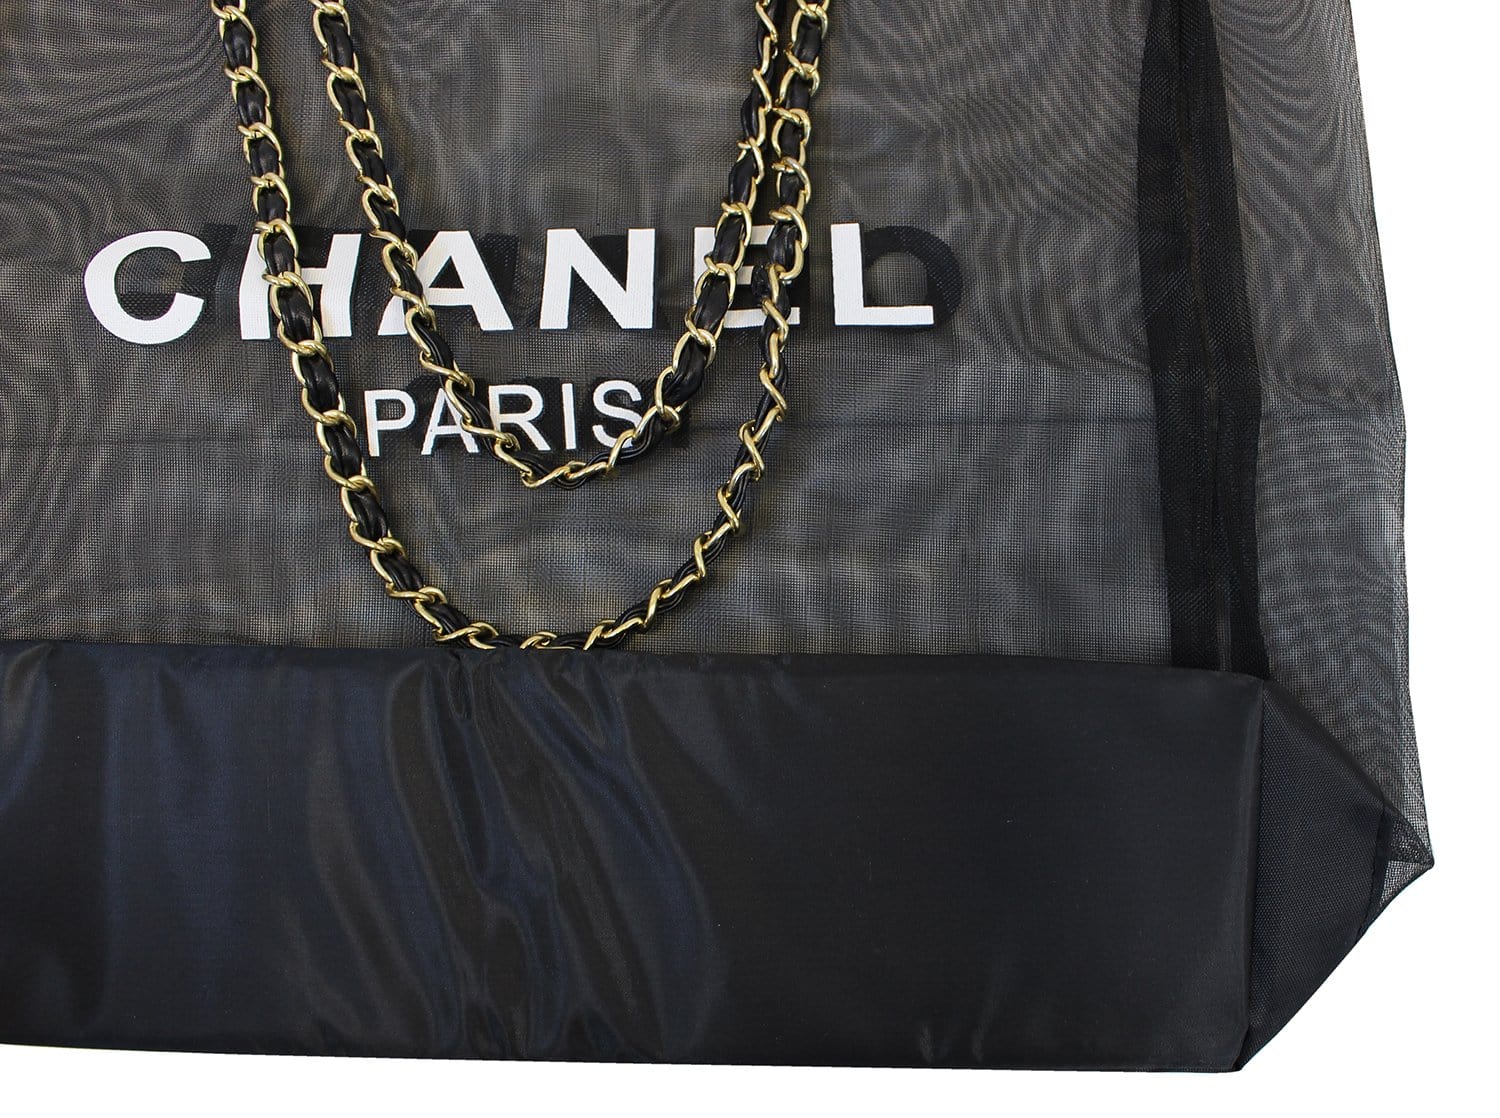 New and Gently Used Chanel Bags, Accessories & Clothing – Page 12 – VSP  Consignment